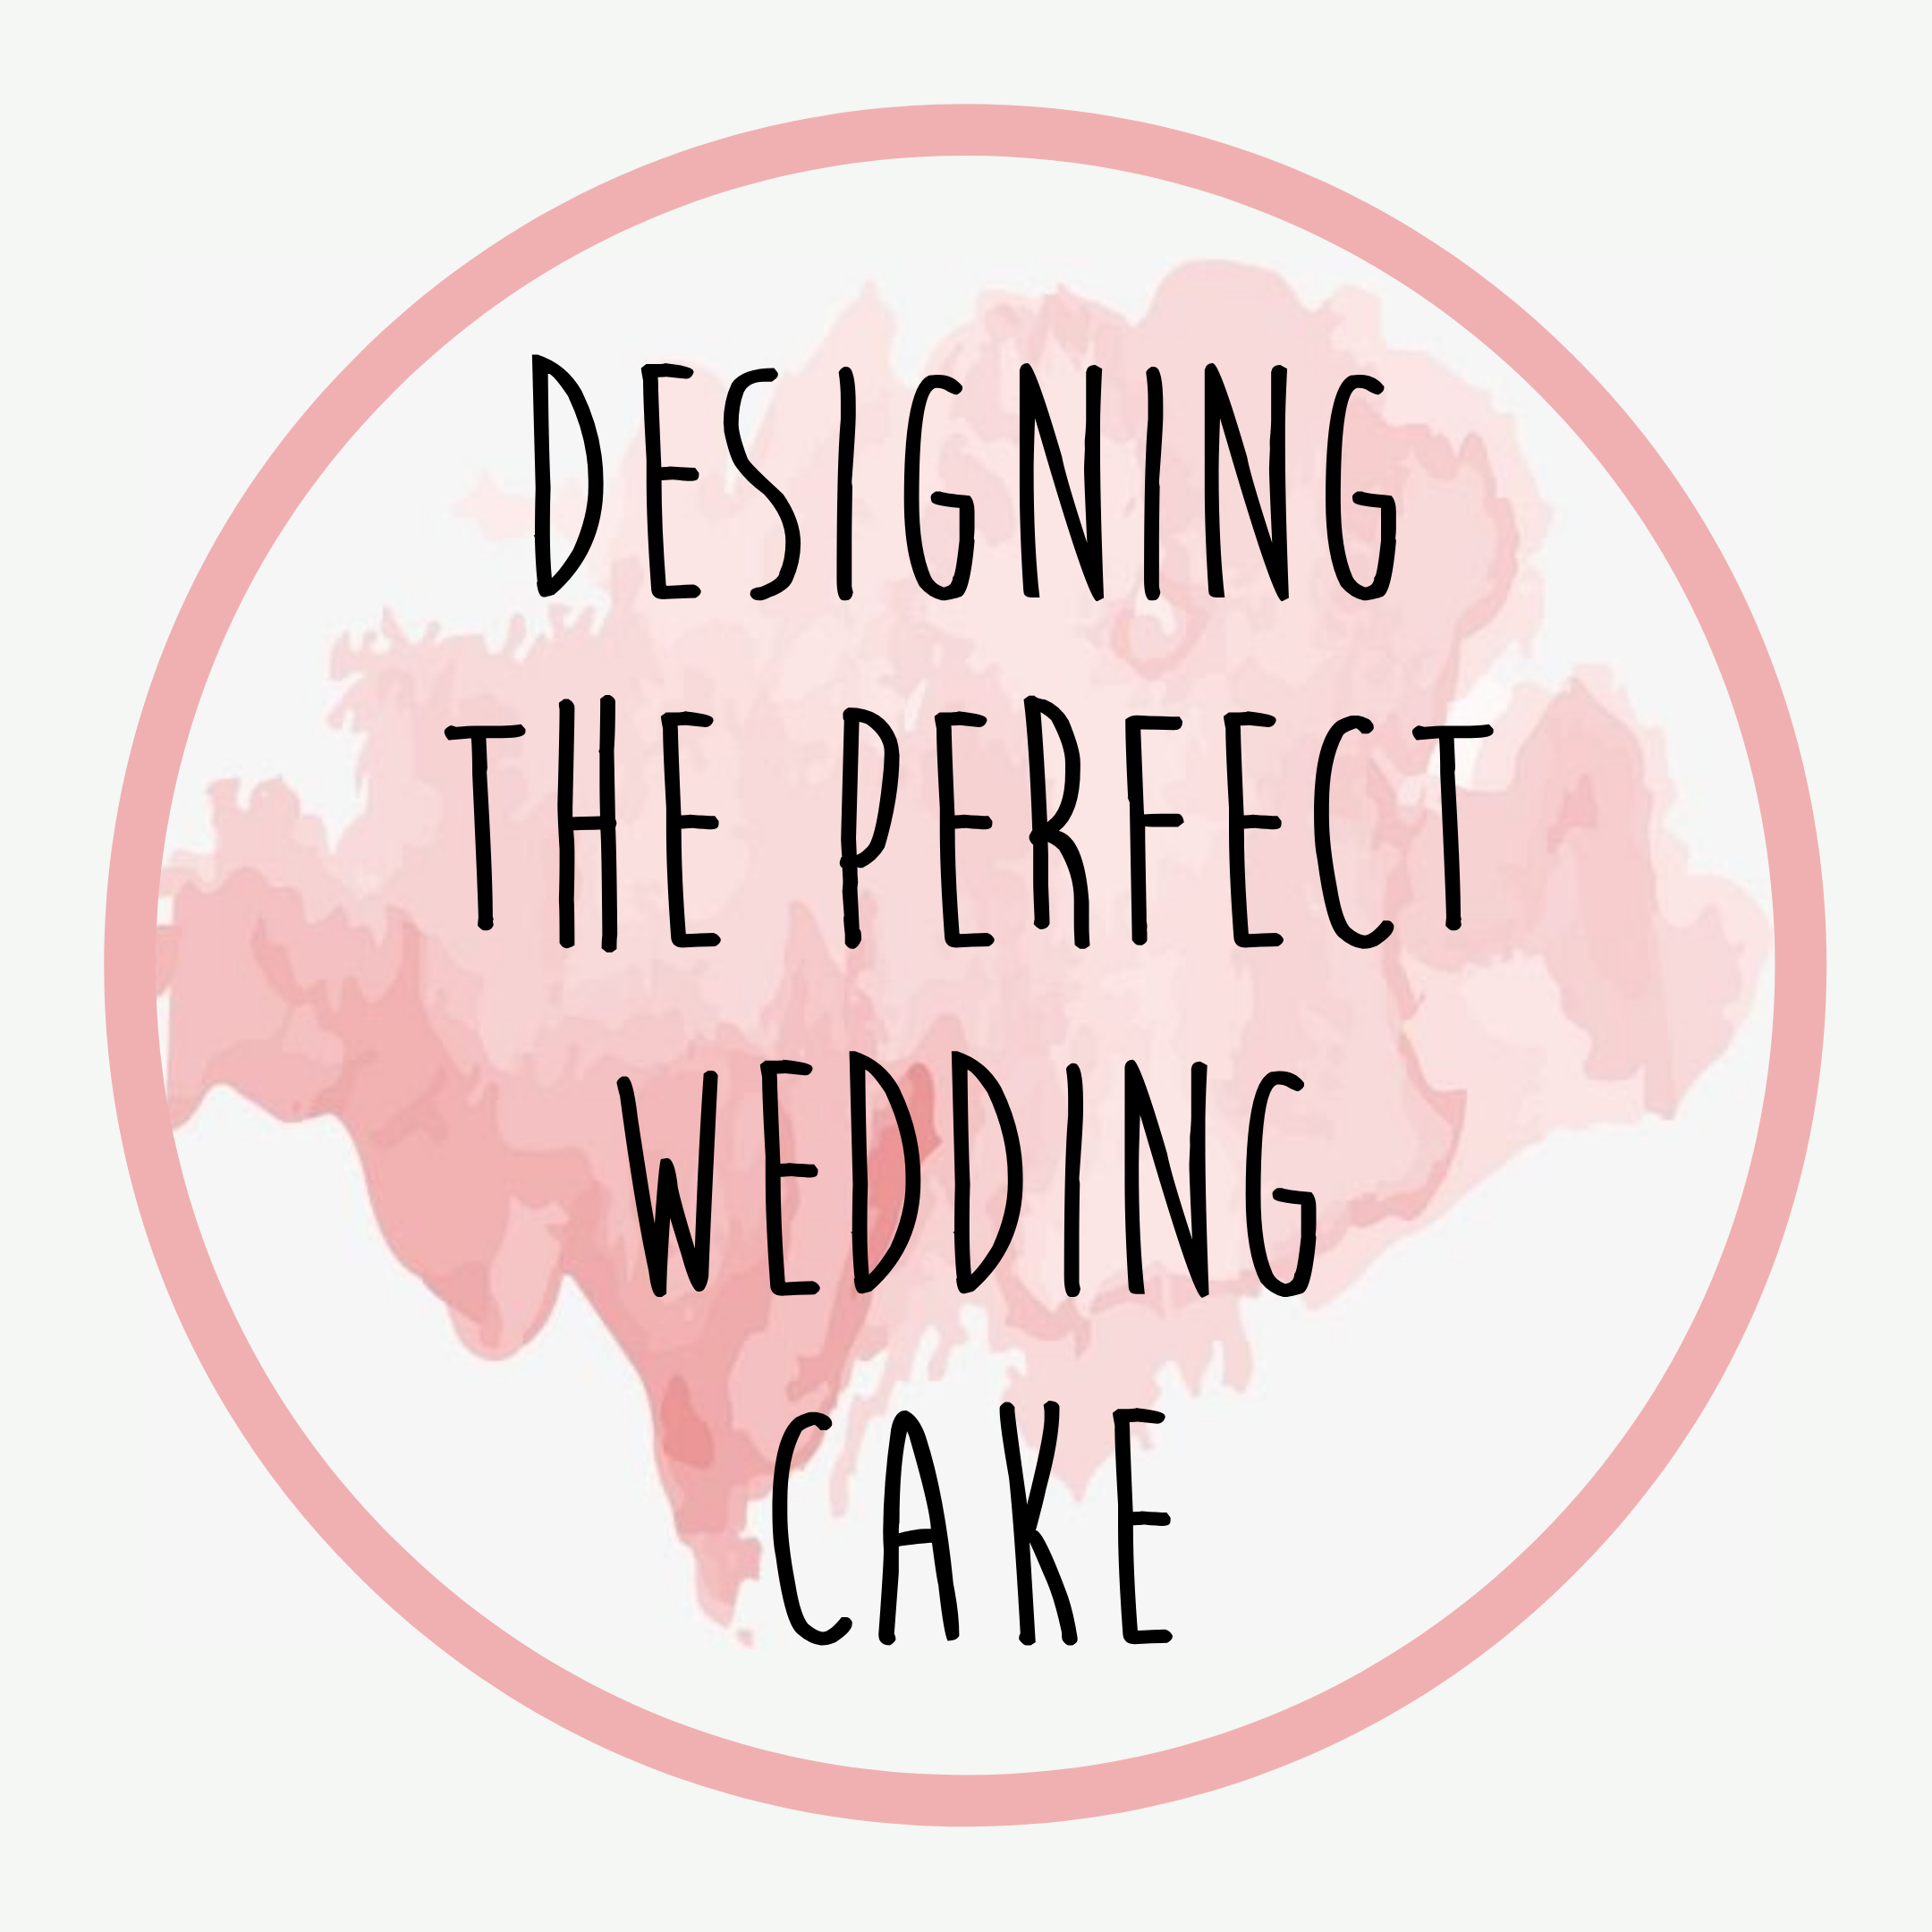 Tips on designing the perfect wedding cake